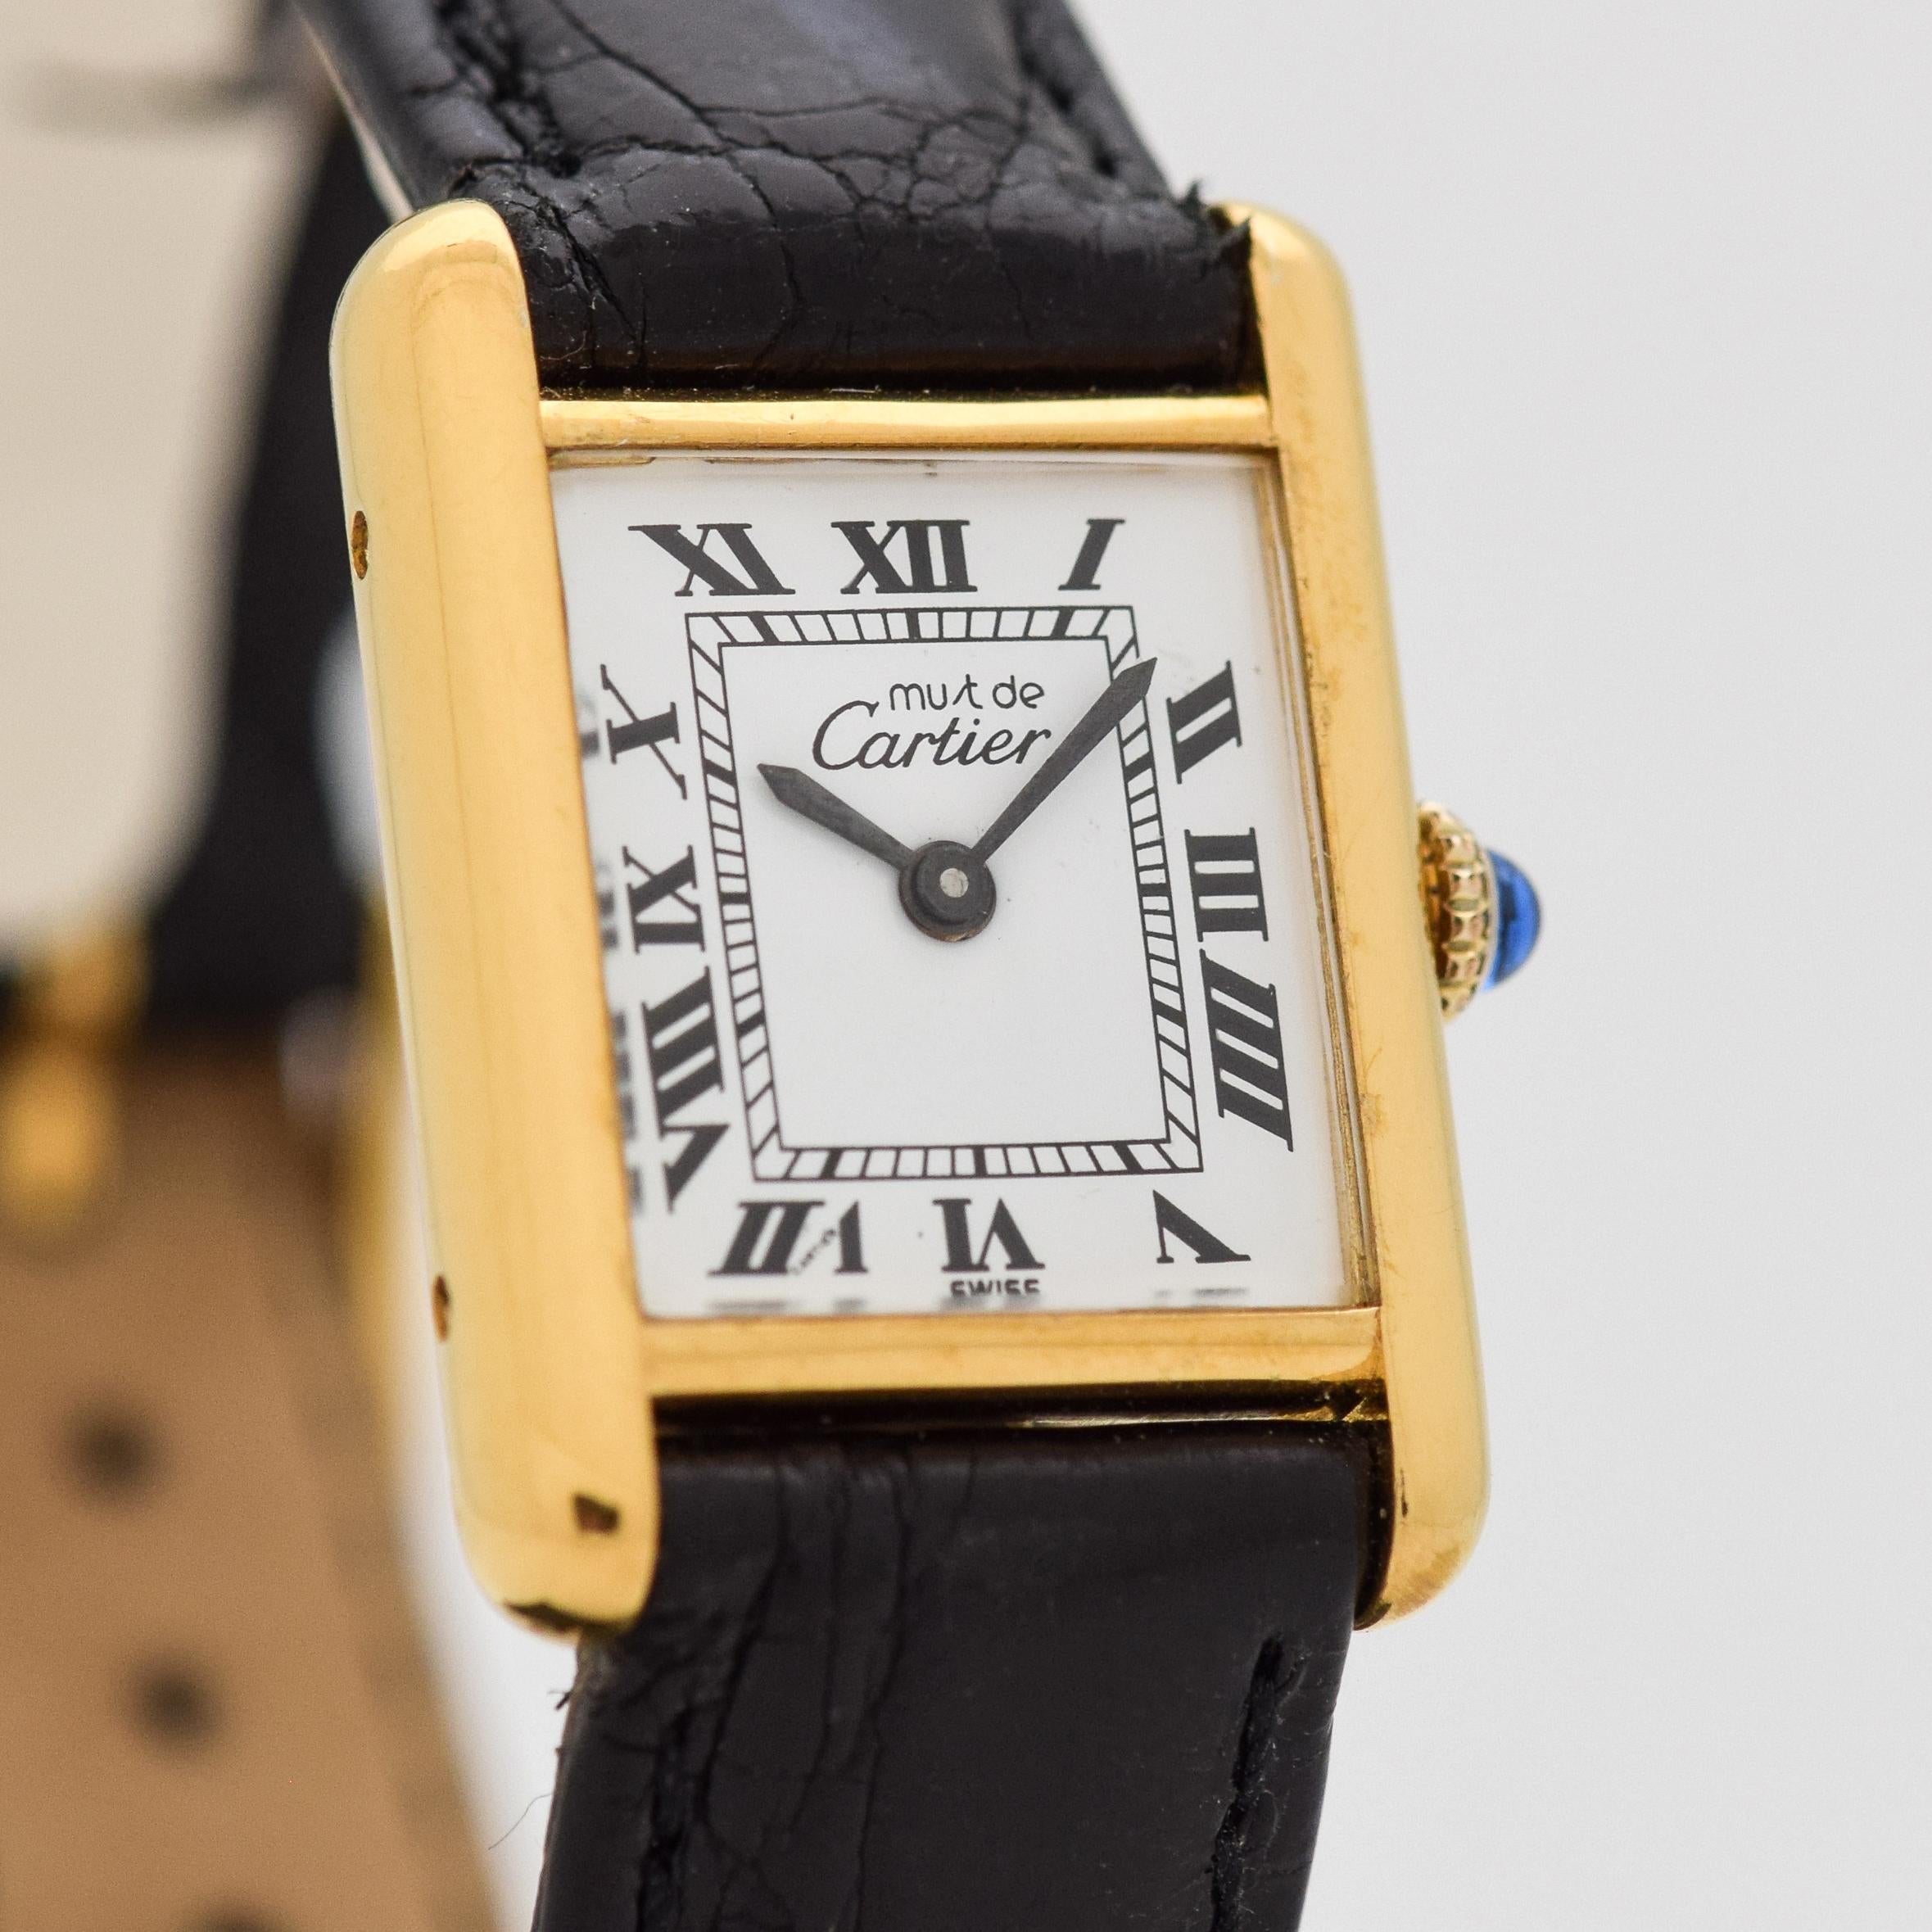 1980's Vintage Cartier Ladies Classic Size Must de Tank 18k Yellow Gold Plated Over Sterling Silver watch with Original White Dial with Black Roman Numerals. 20mm x 27mm lug to lug (0.79 in. x 1.06 in.) - 17 jewel, manual caliber ETA movement.